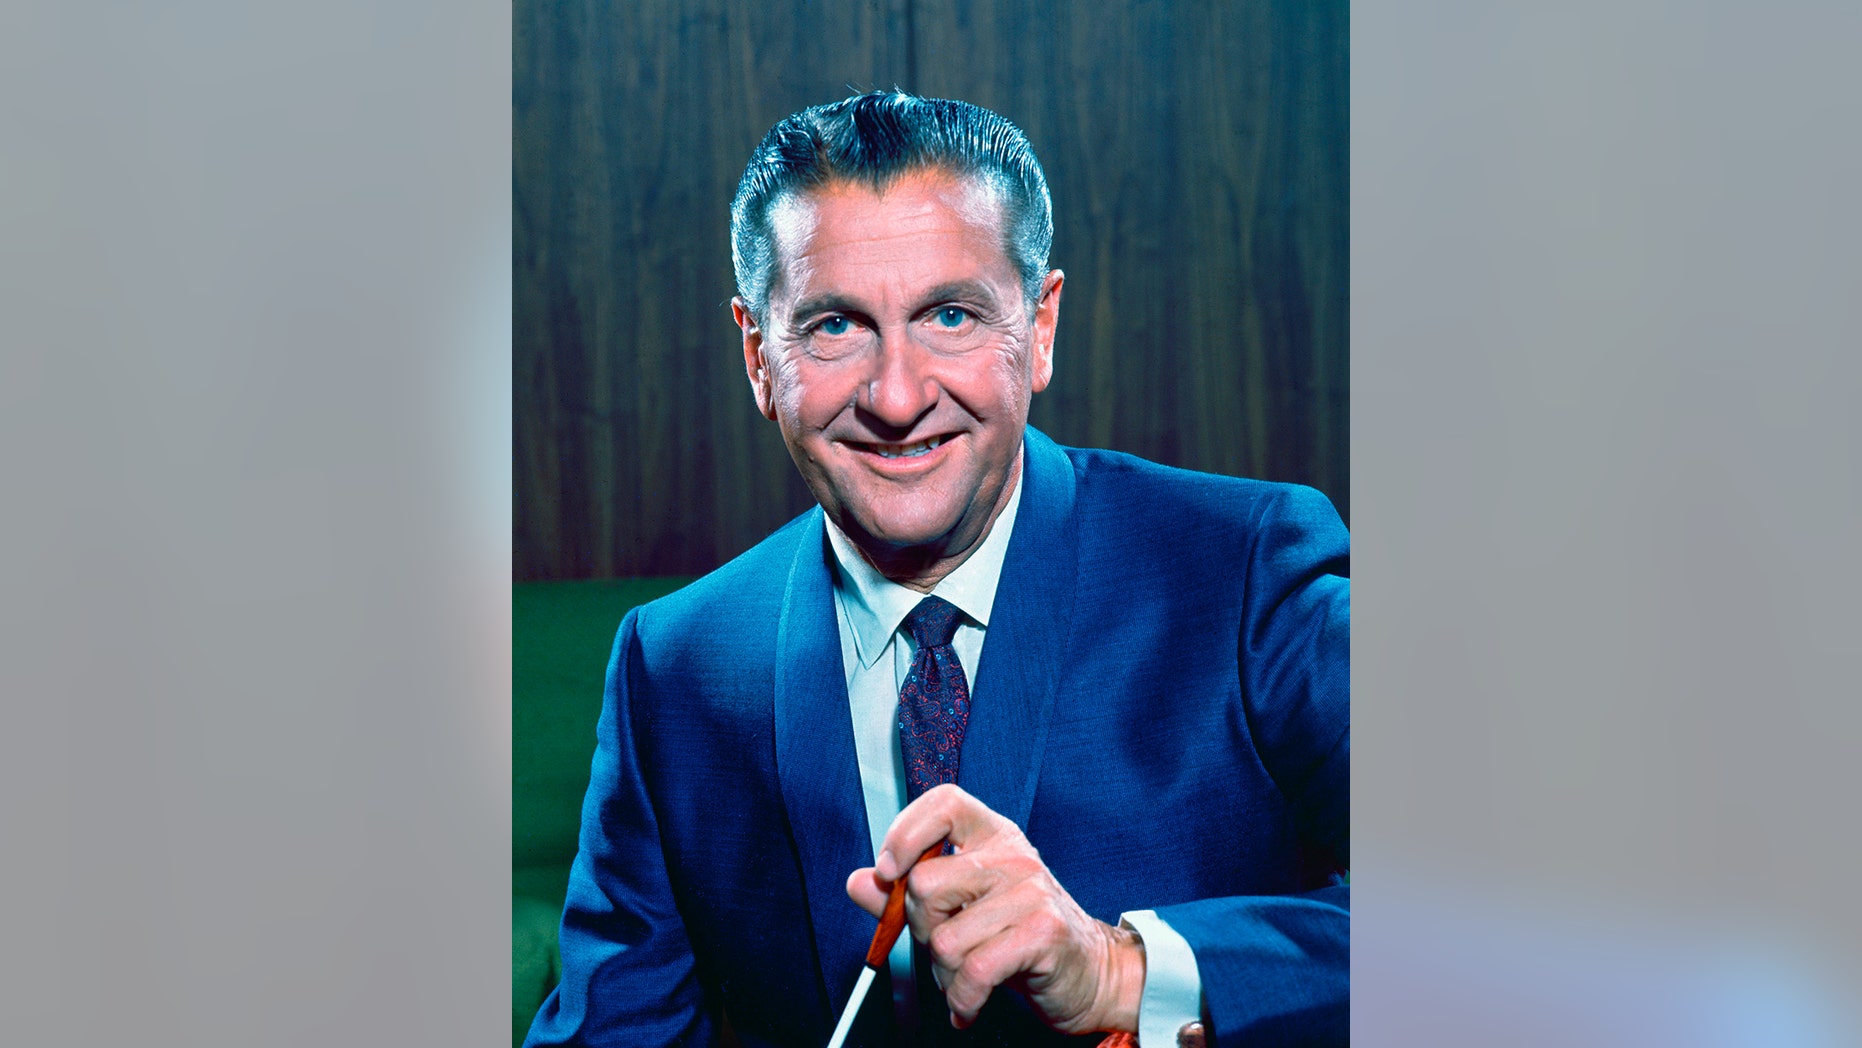 Bandleader Lawrence Welk ‘was most proud of being an American,’ stayed true to his humble roots, says grandson